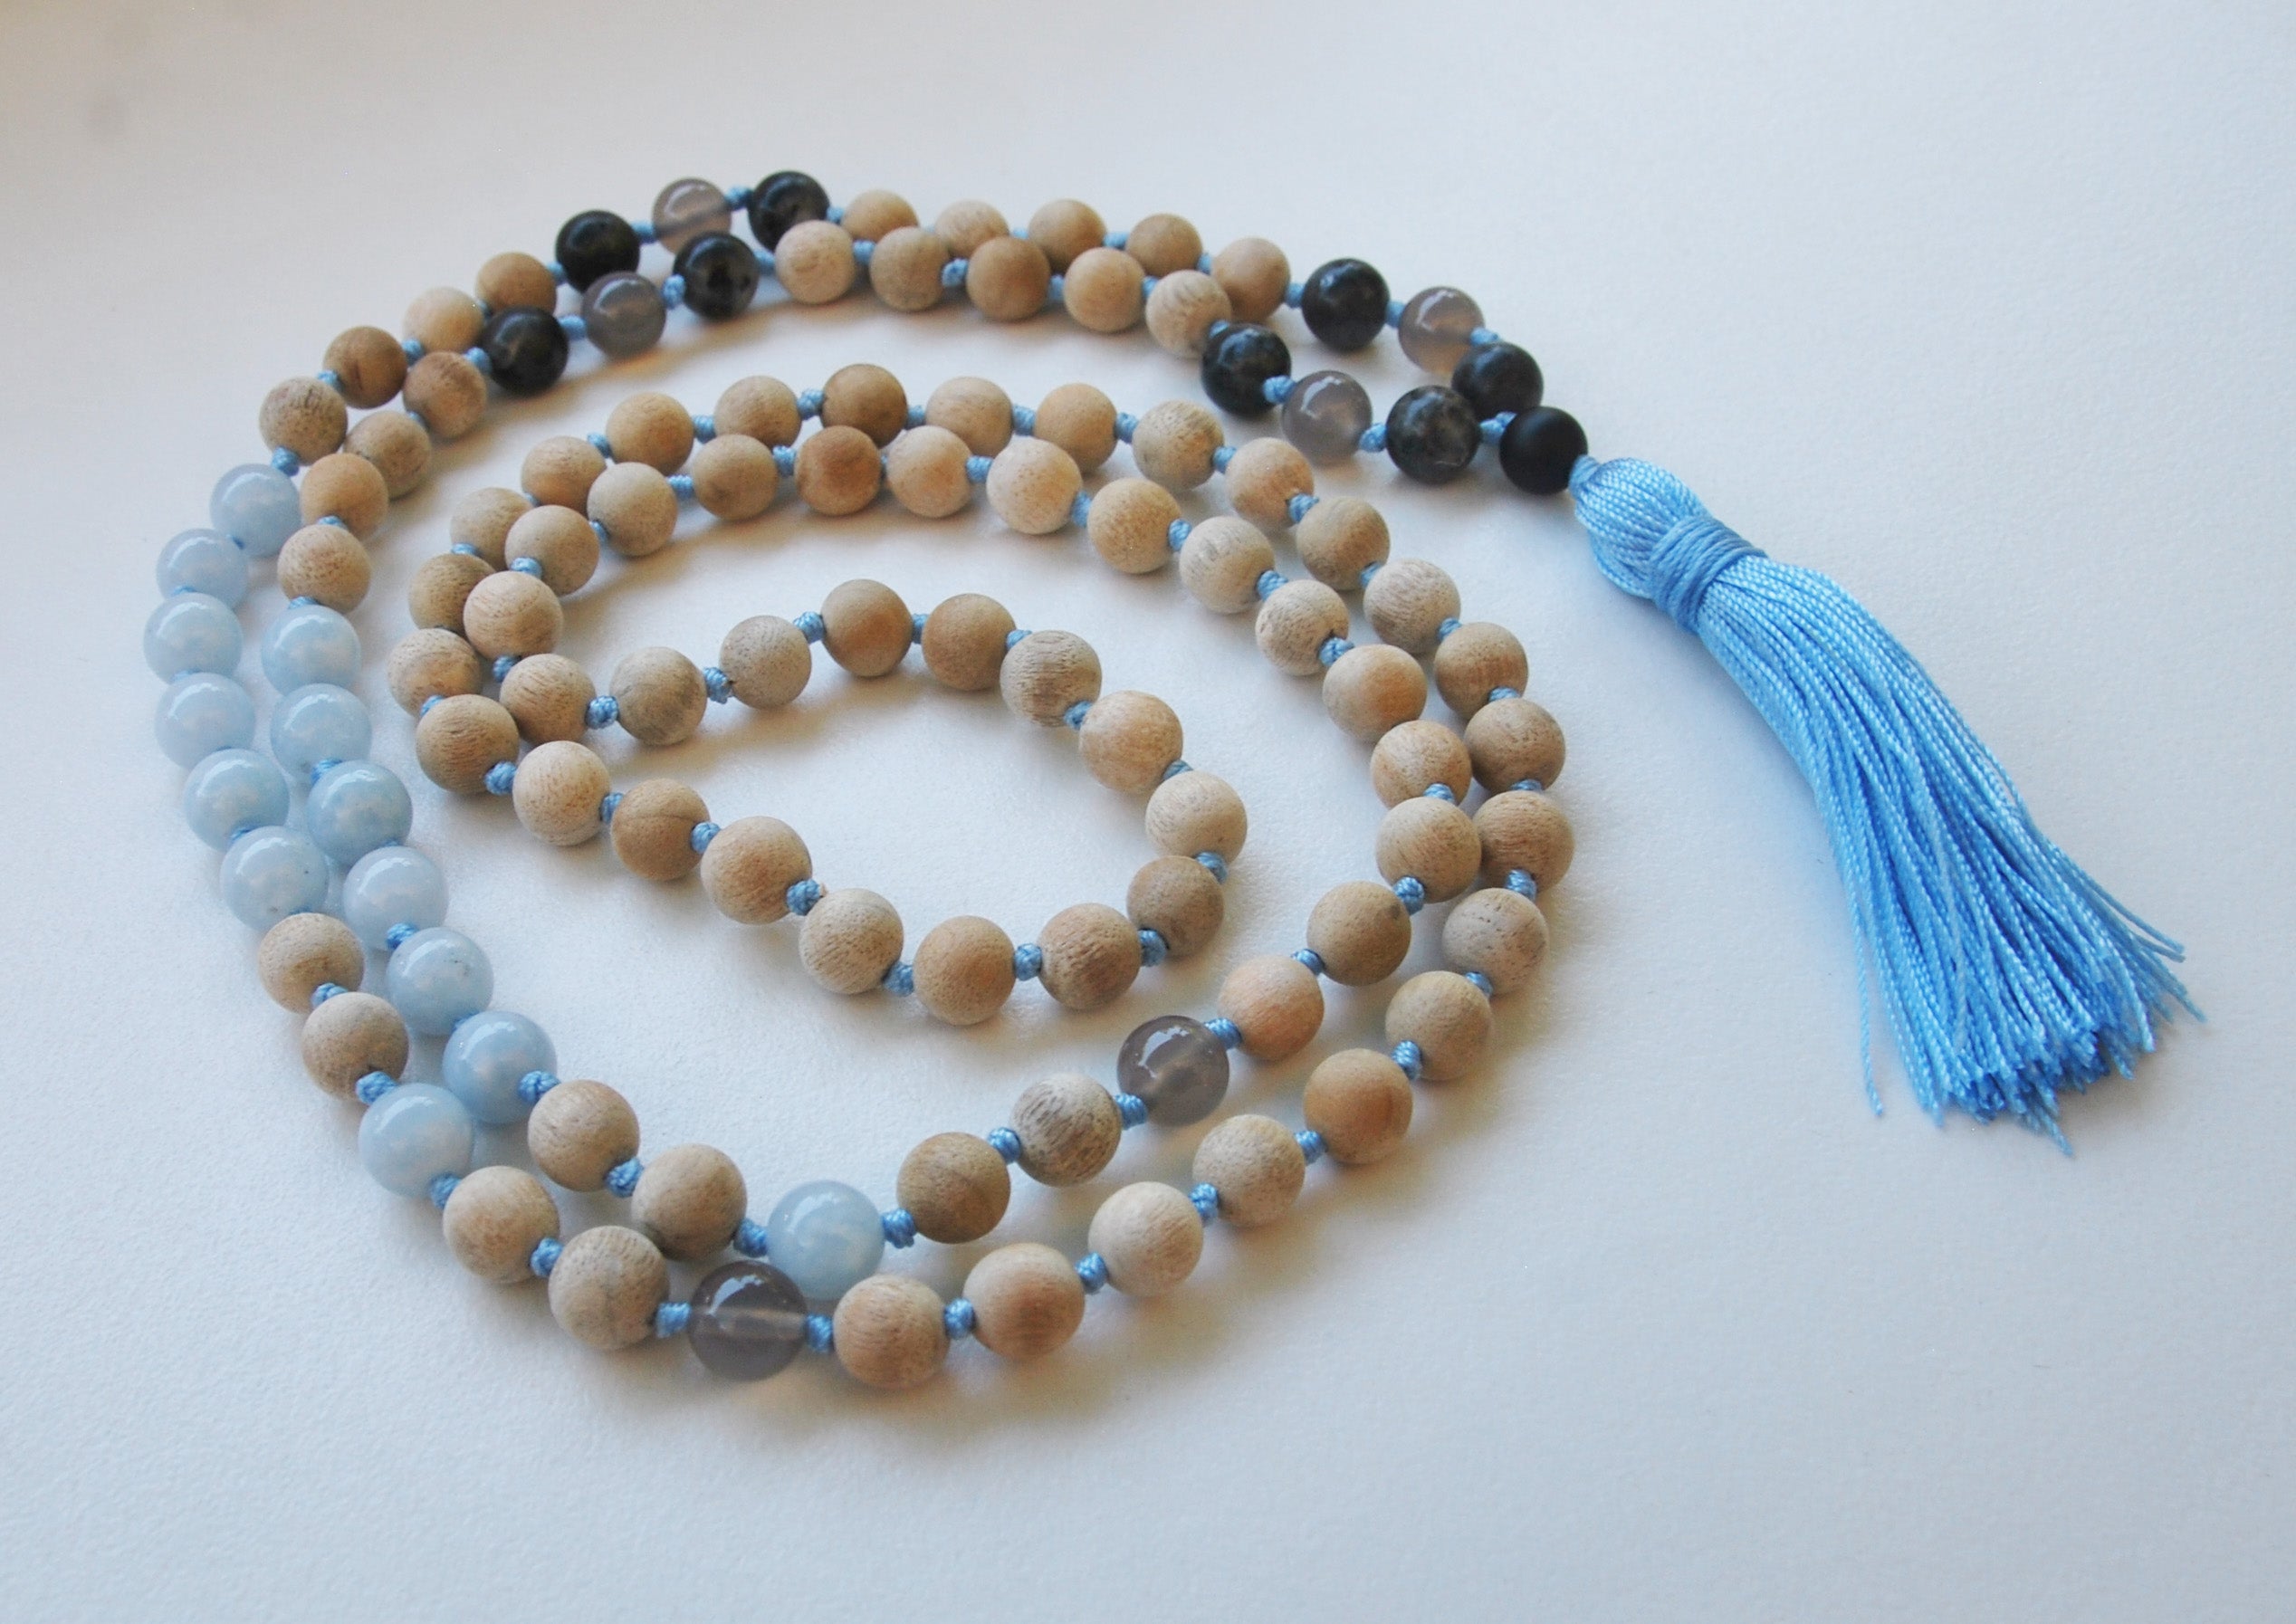 8mm Sandalwood & Aquamarine 108 Knotted Mala Necklace with Colored Tassel